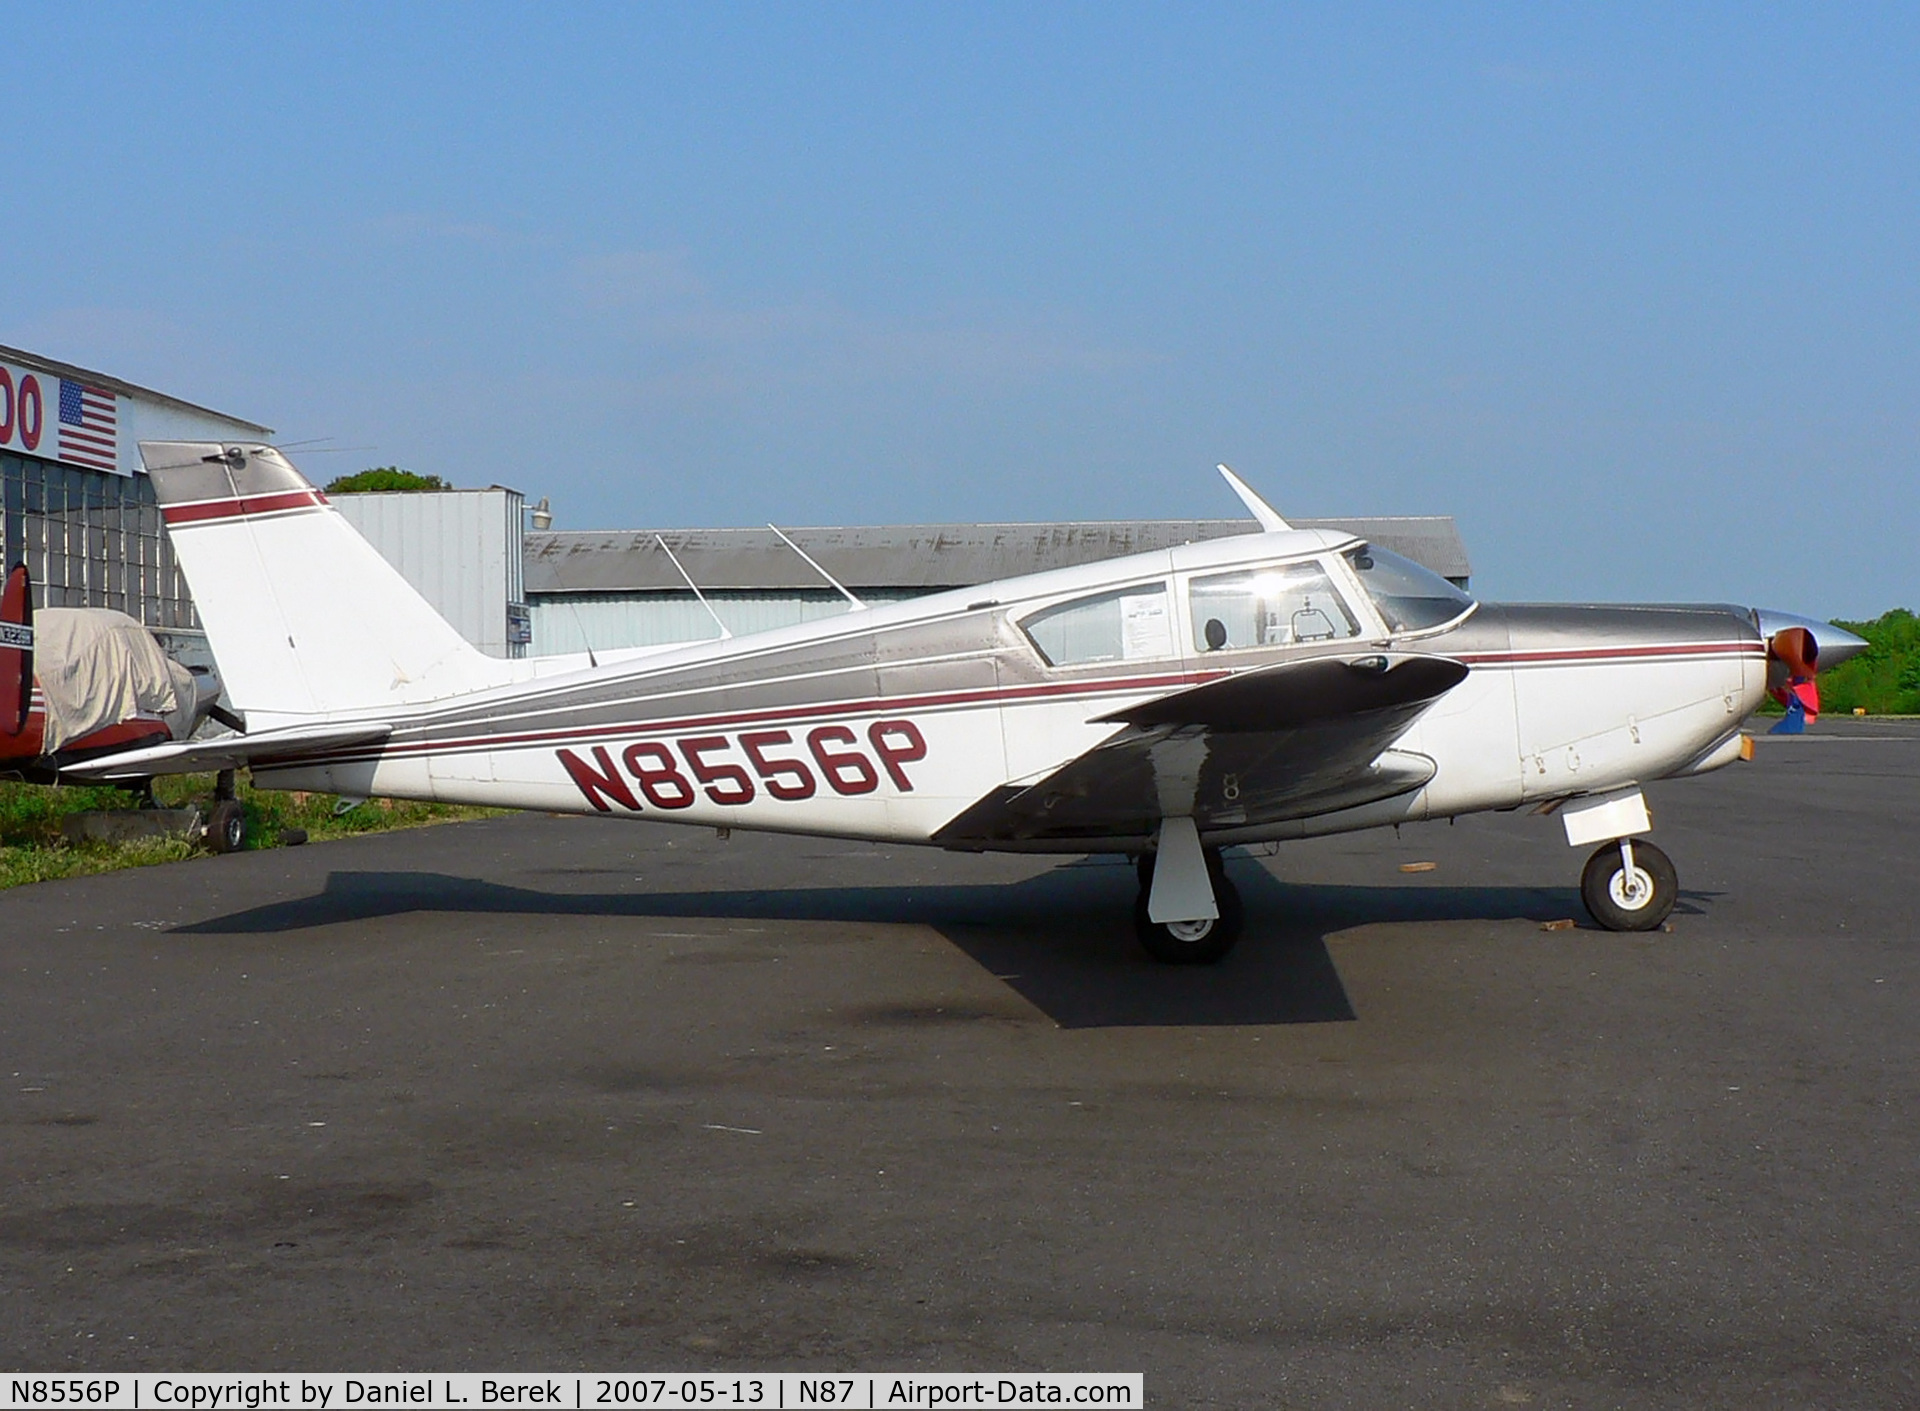 N8556P, 1964 Piper PA-24-260 Comanche B C/N 24-4013, Beautiful classic 1964 Commanche behind the hangar at Robbinsville